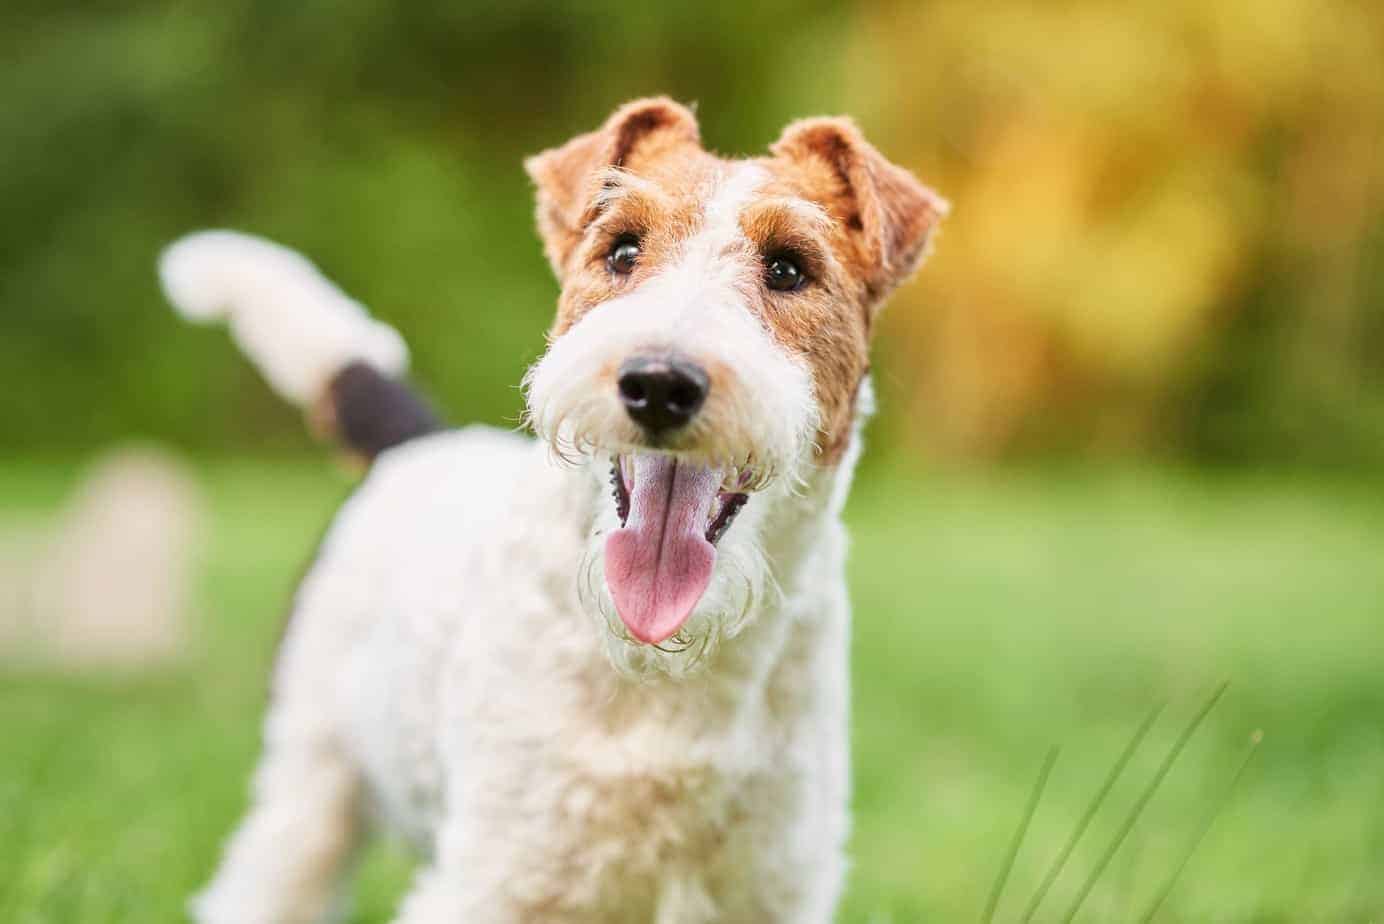 What Wild Animal Are You? Wire Fox Terrier